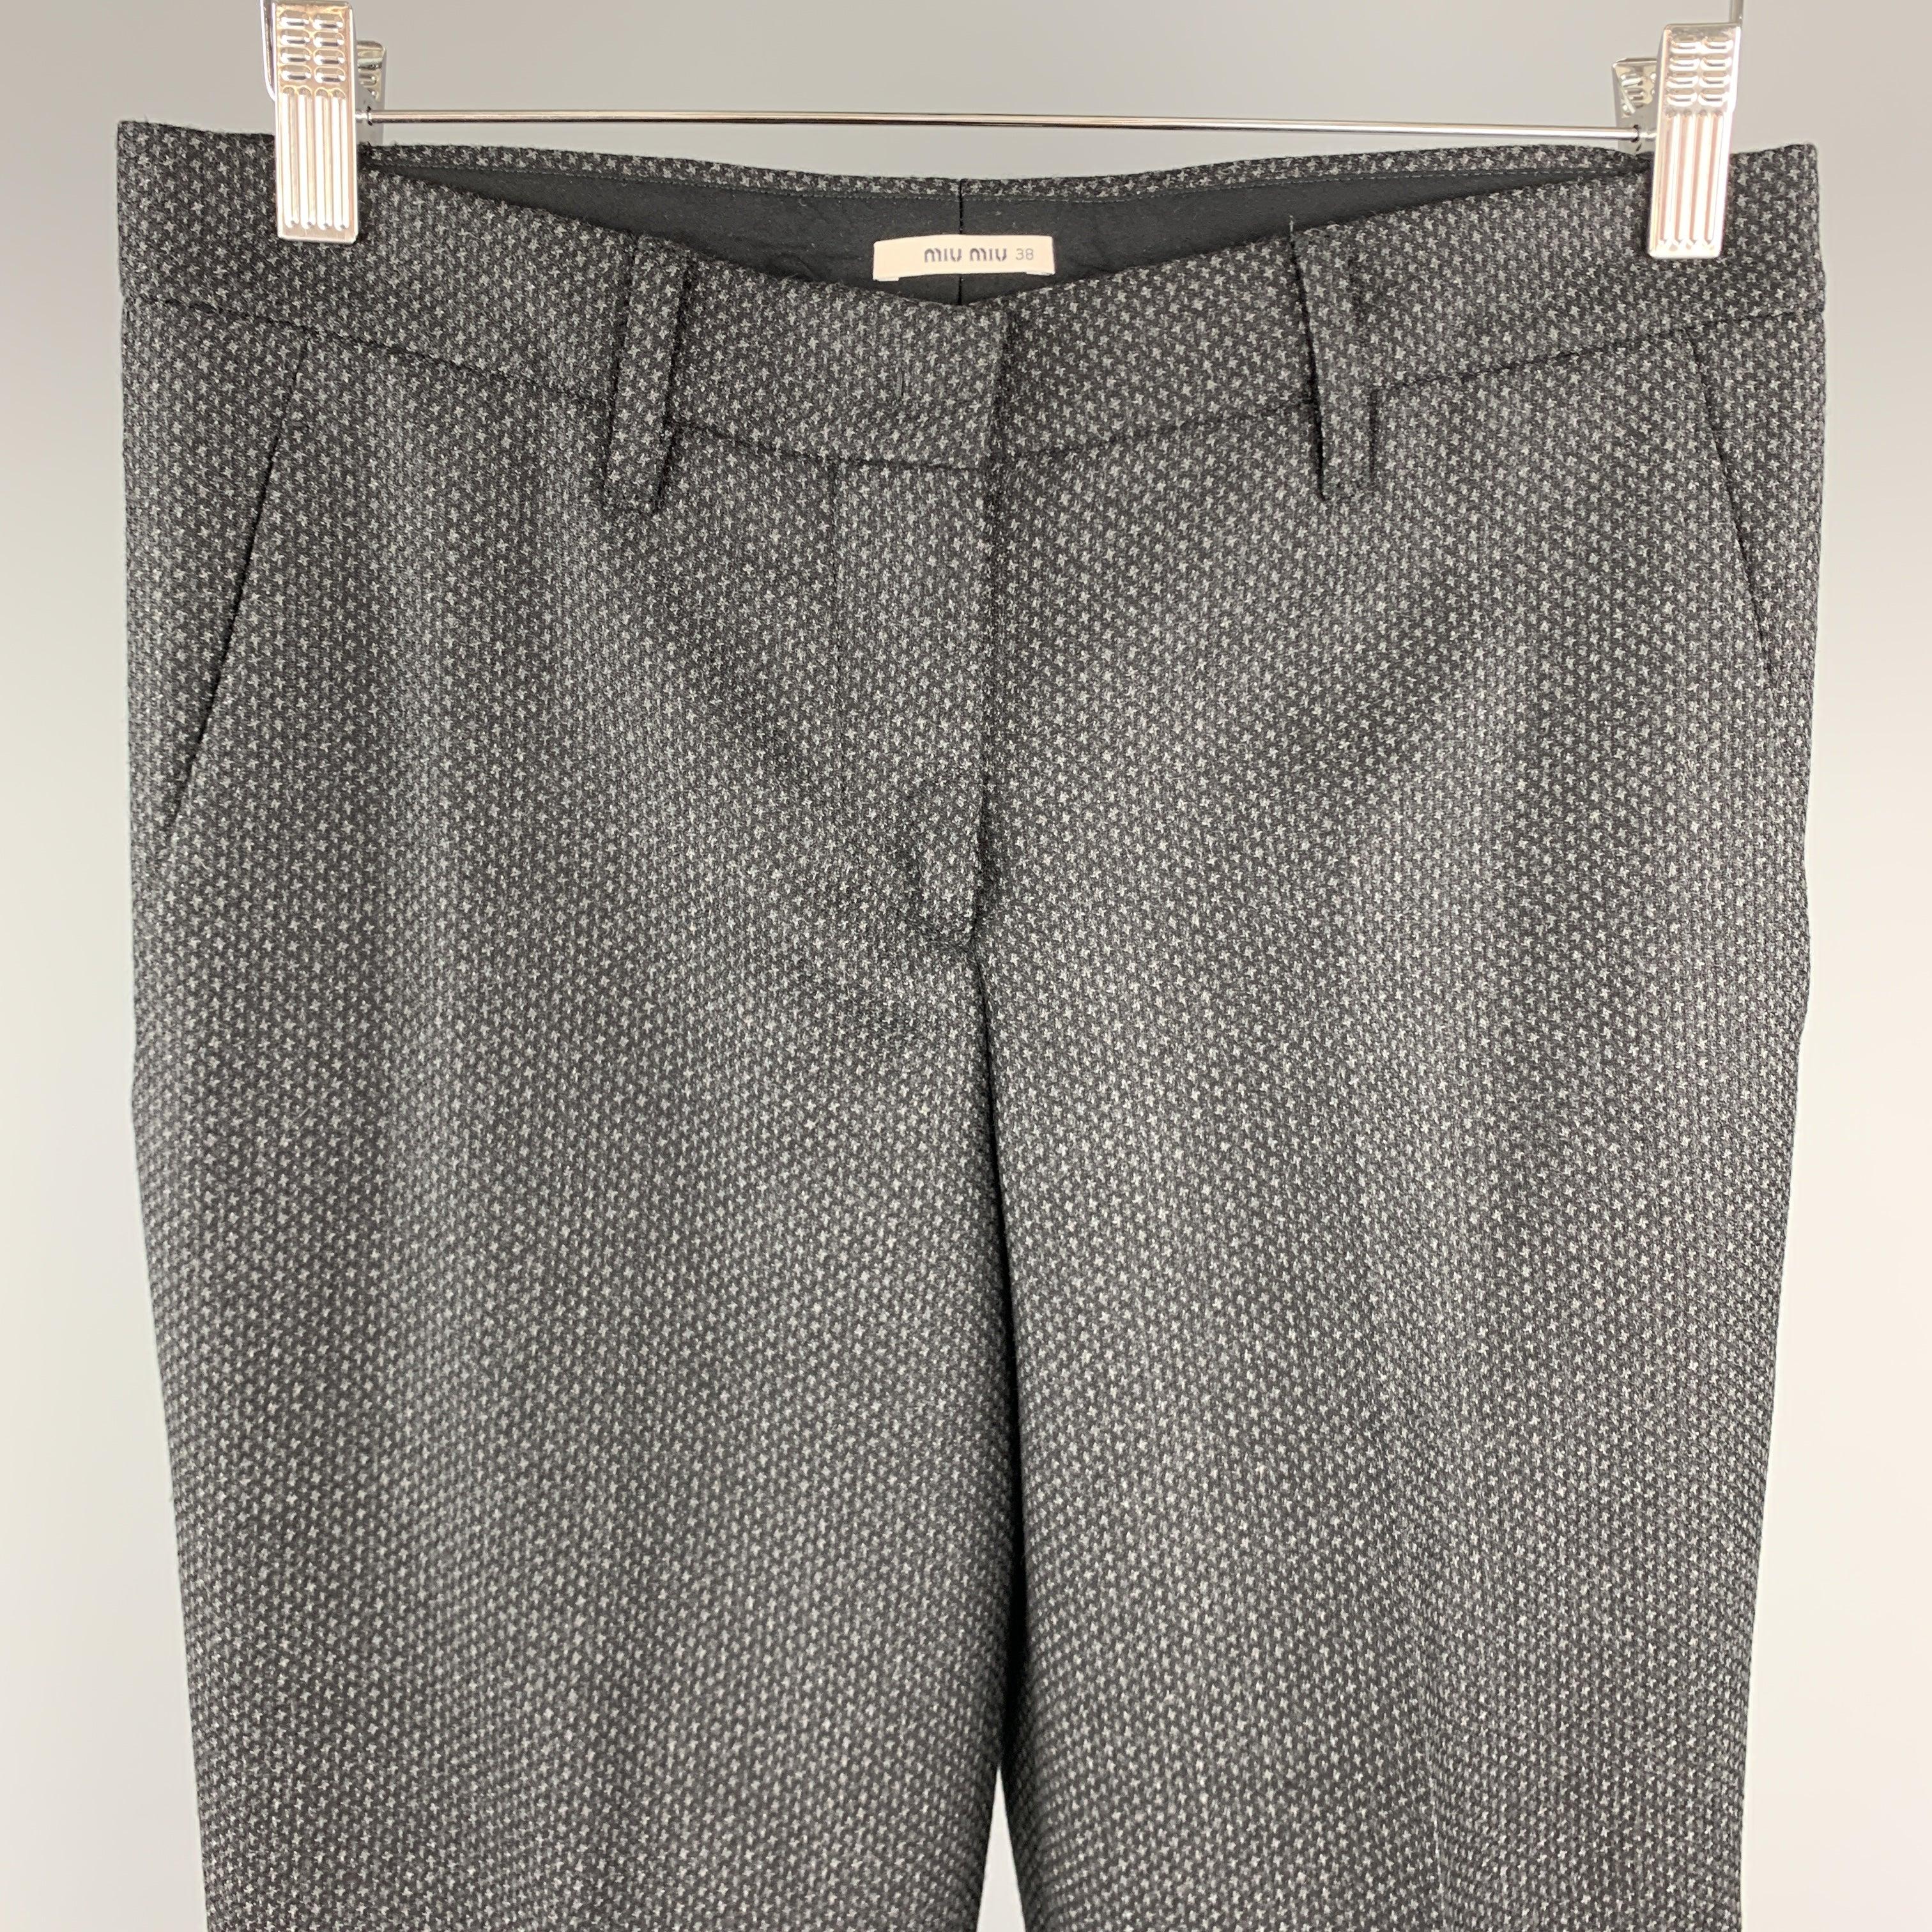 MIU MIU dress pants come in charcoal wool with an abstract houndstooth pattern wih a cropped tapered leg.
Excellent
Pre-Owned Condition. 

Marked:   IT 38 

Measurements: 
  Waist: 30 inches Rise:
9.5 inches Inseam: 25 inches 
  
  
 
Reference: